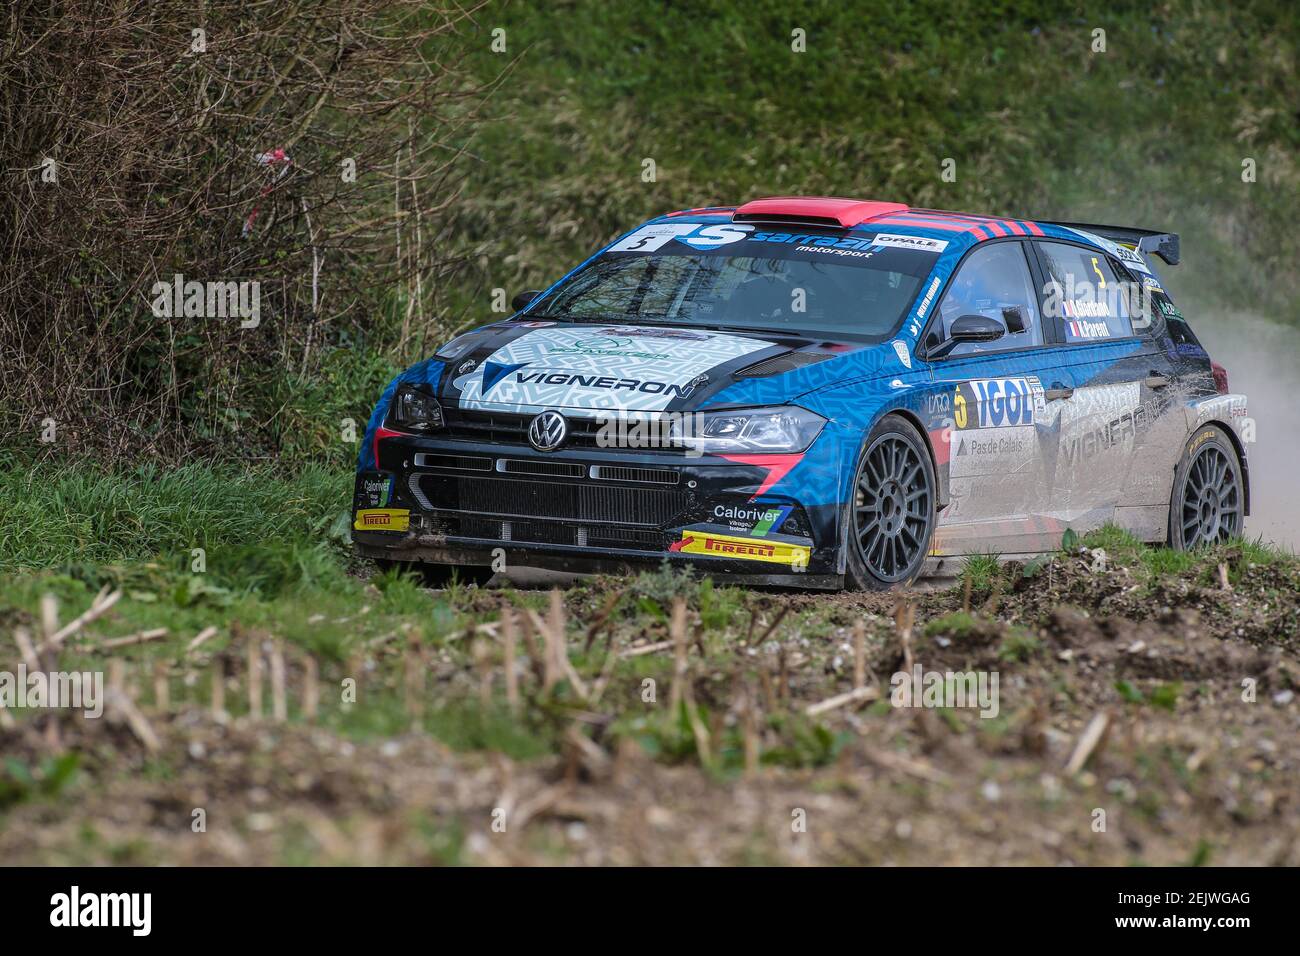 Quentin GIORDANO from France and his co-driver Kevin PARENT compete in  their Volkswagen Polo WRC car during the stage 4 of Le Touquet Rally, first  round of the French Rally Championship. (Photo